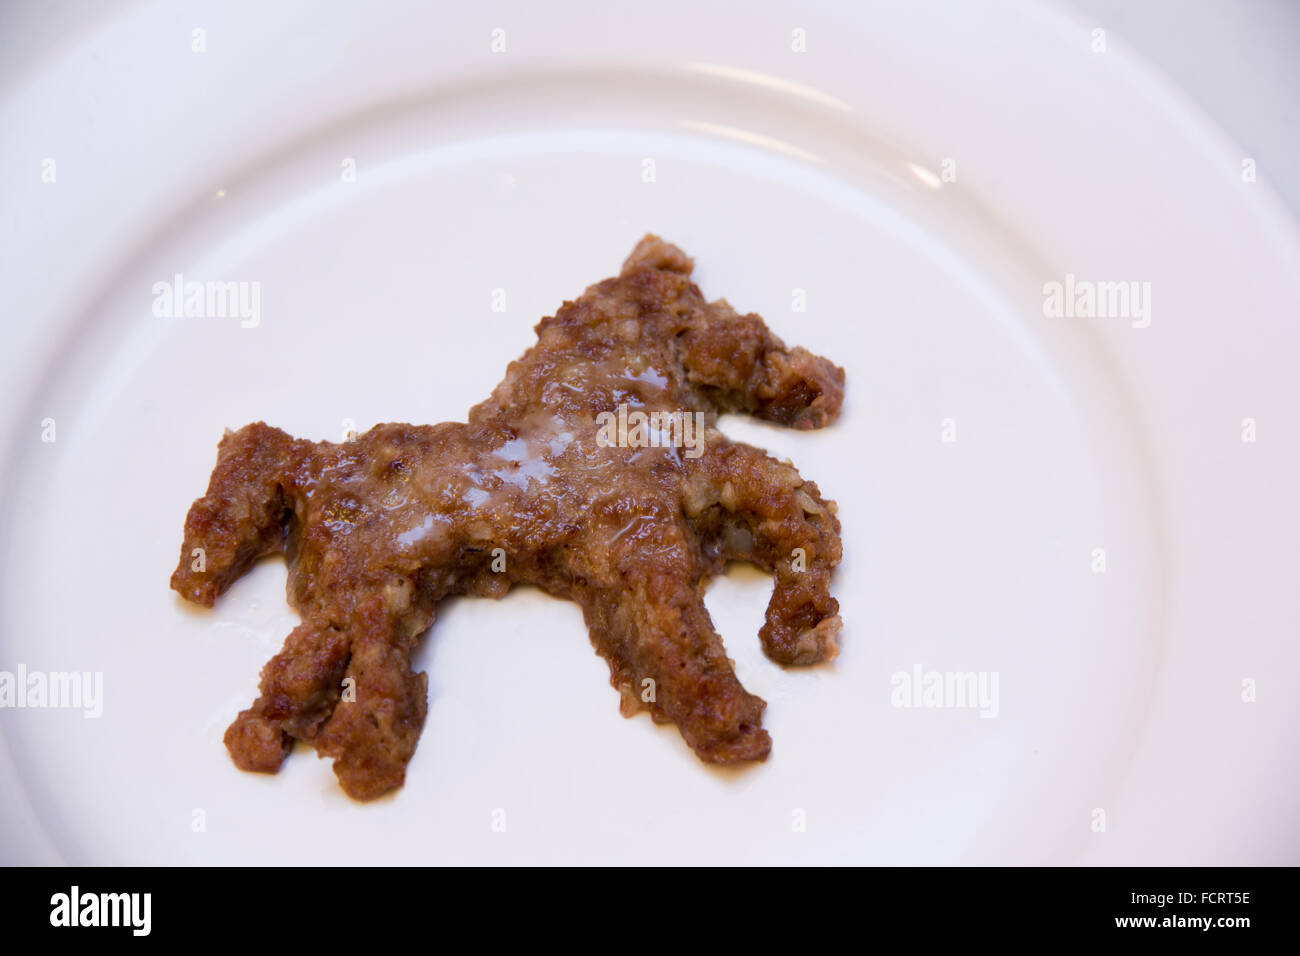 A burger cut into the shape of a horse. Stock Photo